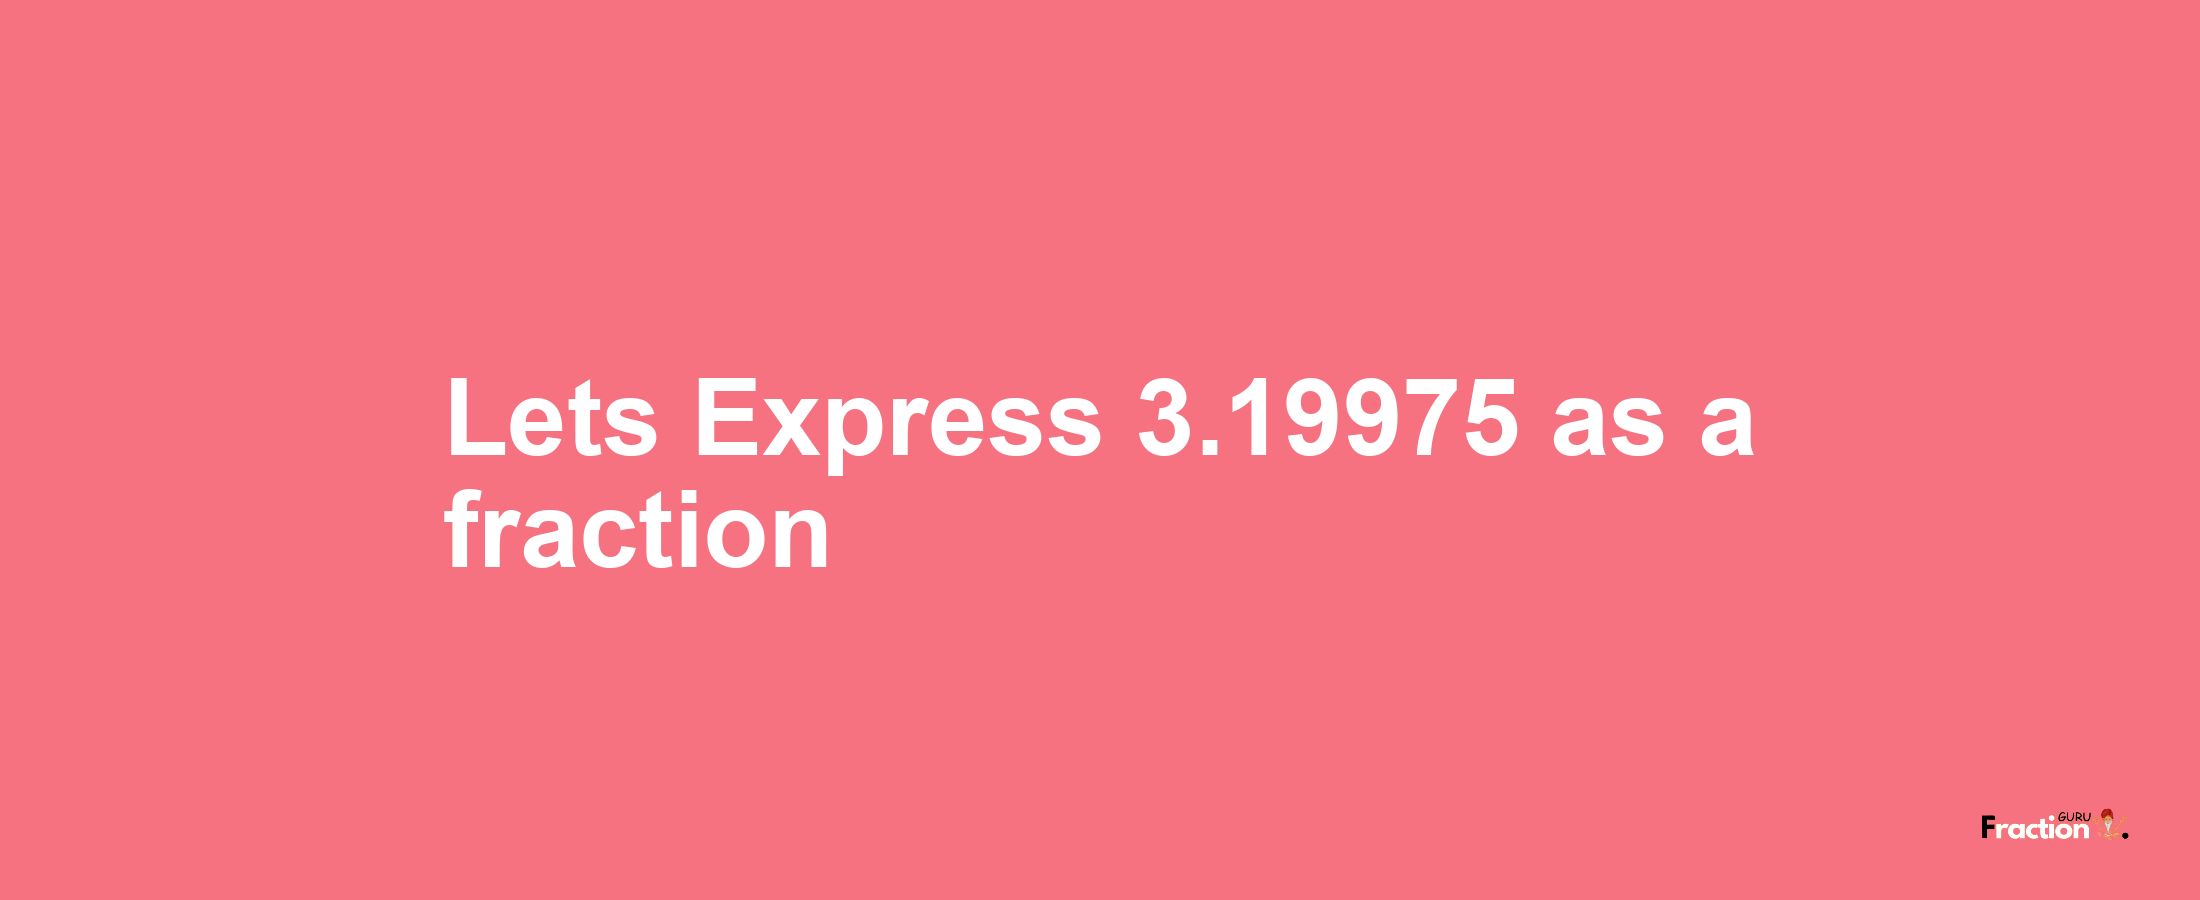 Lets Express 3.19975 as afraction